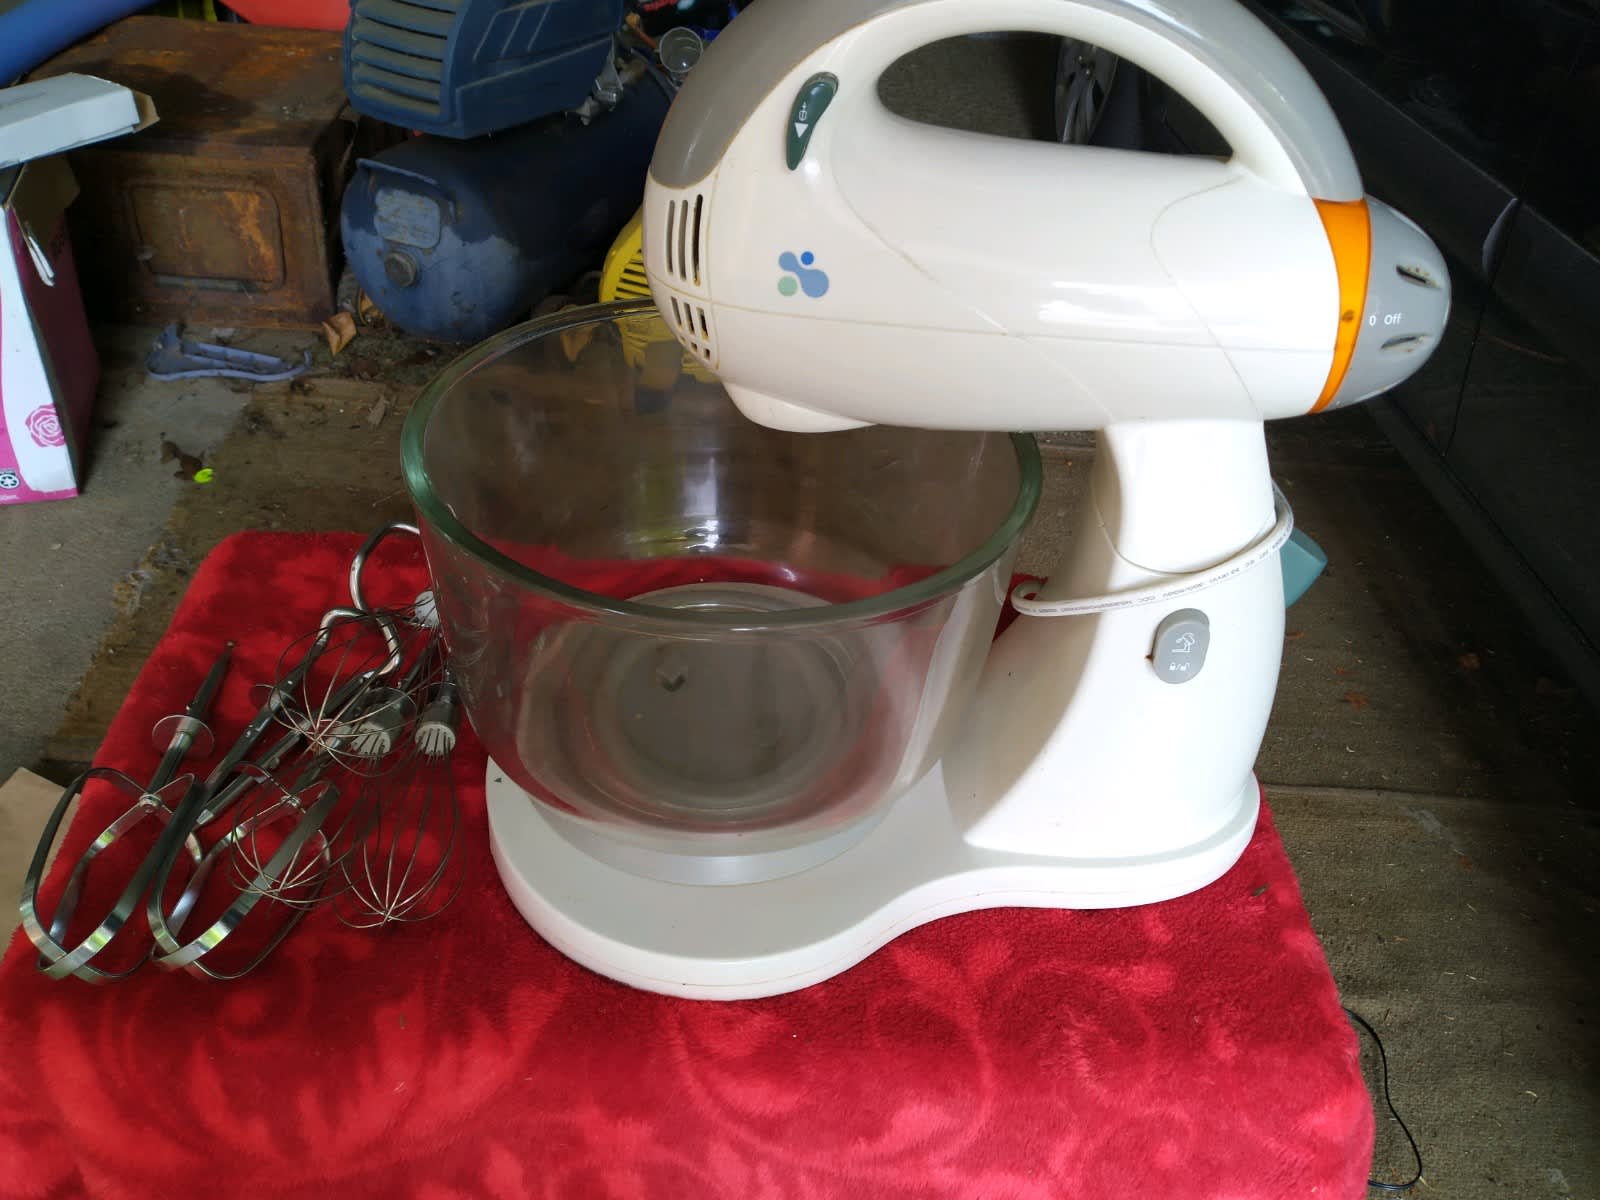 Artisan Mixer, with 4.7L bowl, Model 180, Special Edition, Light &  Shadow - KitchenAid brand